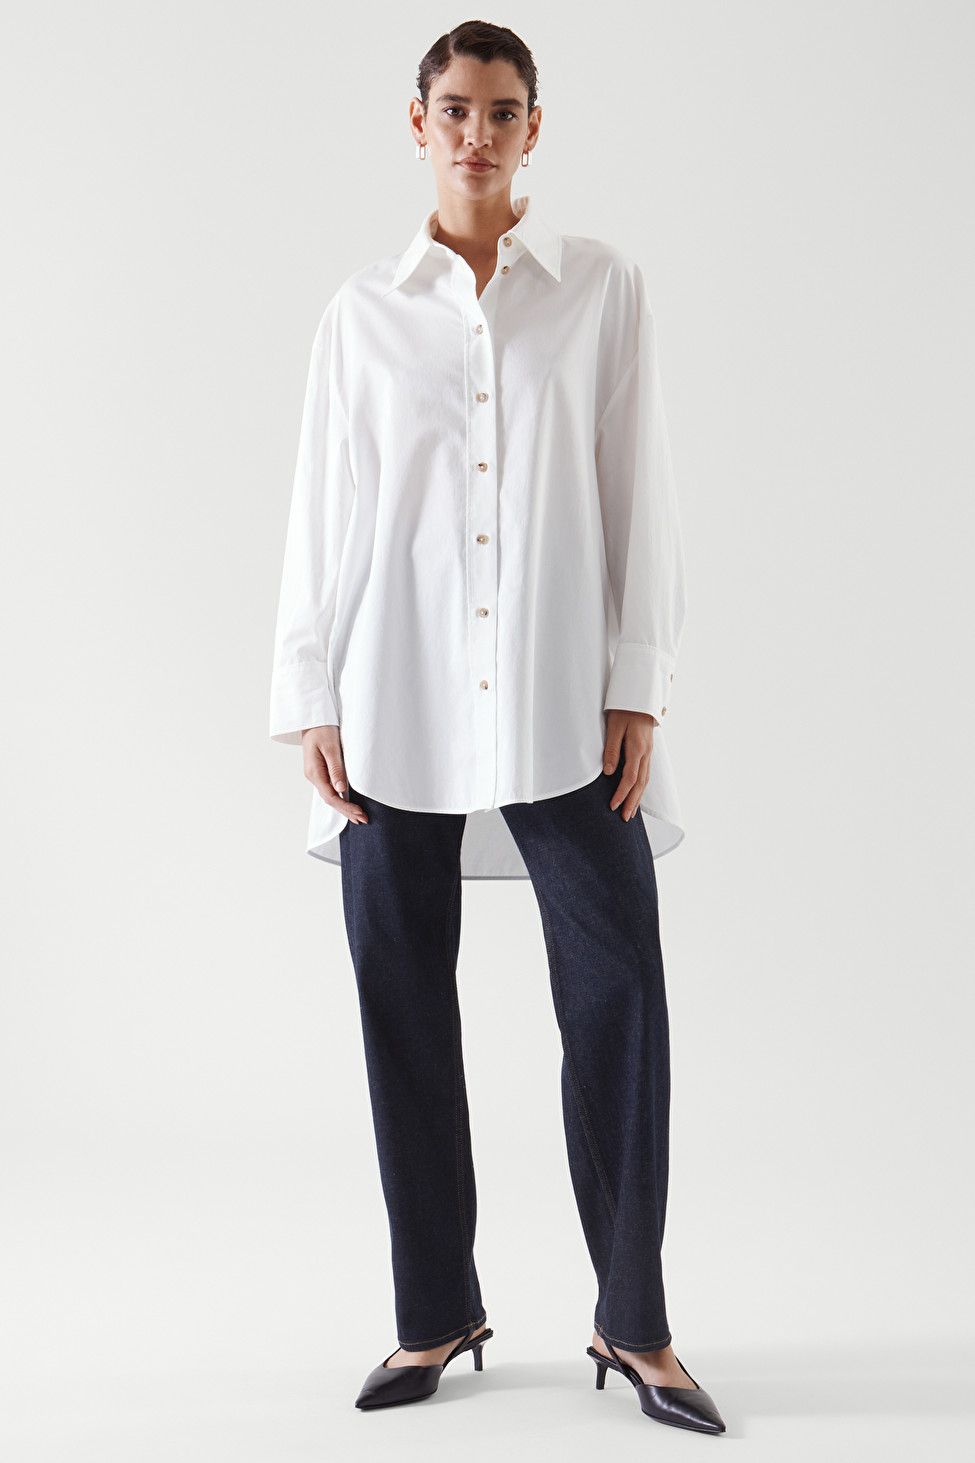 Best ladies white shirts: oversized, broderie, ruffle and poplin